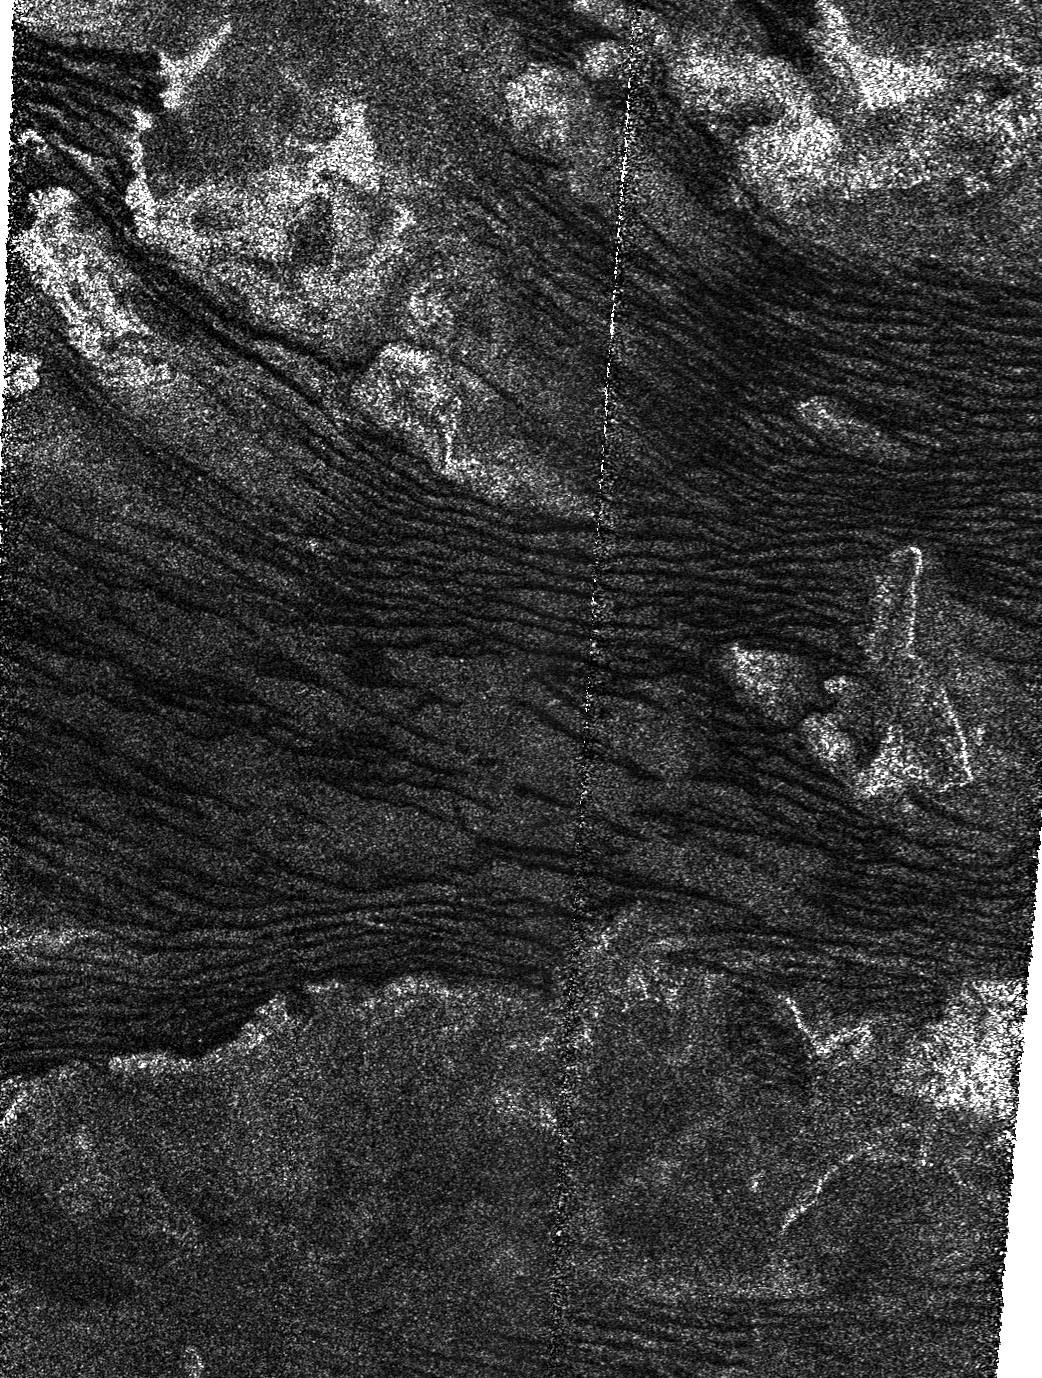 This is a portion of a Cassini radar mapper image obtained by the Cassini spacecraft on its Dec. 21, 2008, flyby of Saturn's moon Titan.